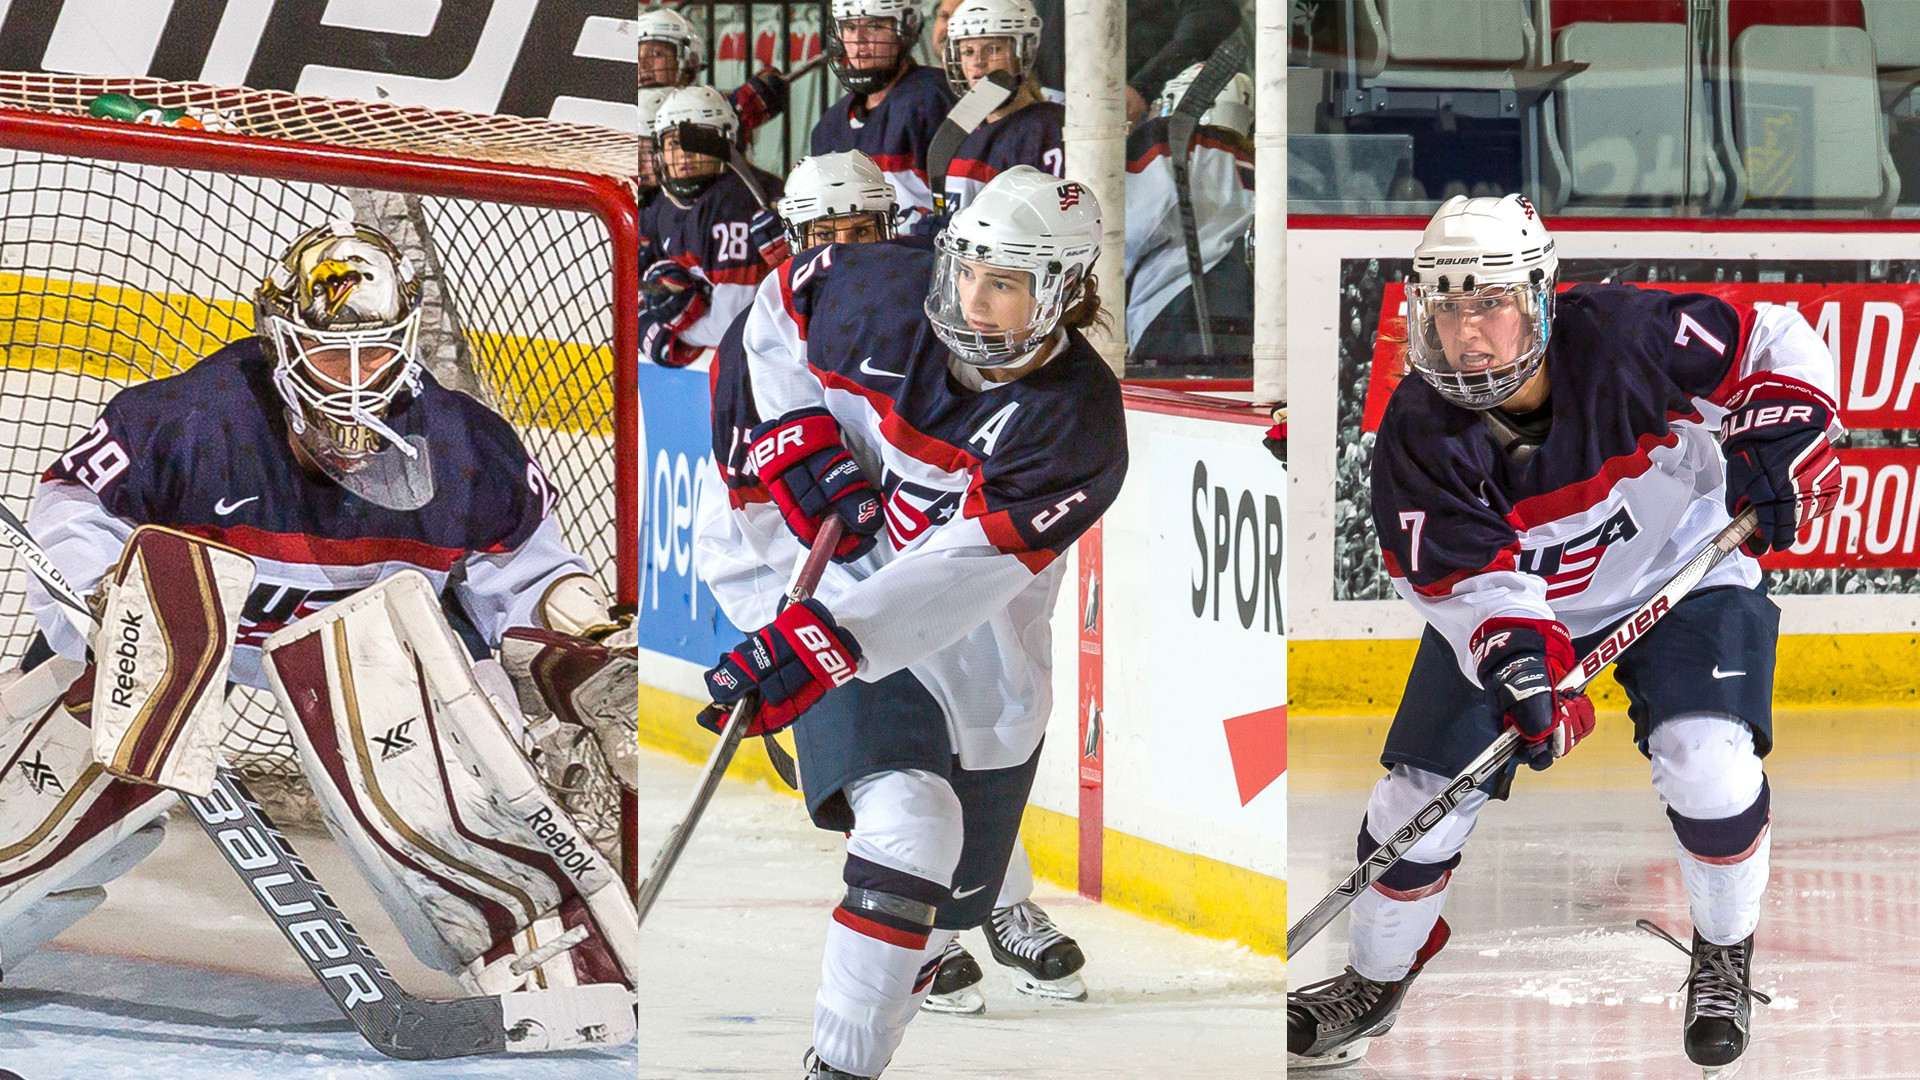 1920x1080 The Eagles will be among the group vying for spots on the U.S. roster for  the upcoming two-game Canada series. USA Hockey Juniors